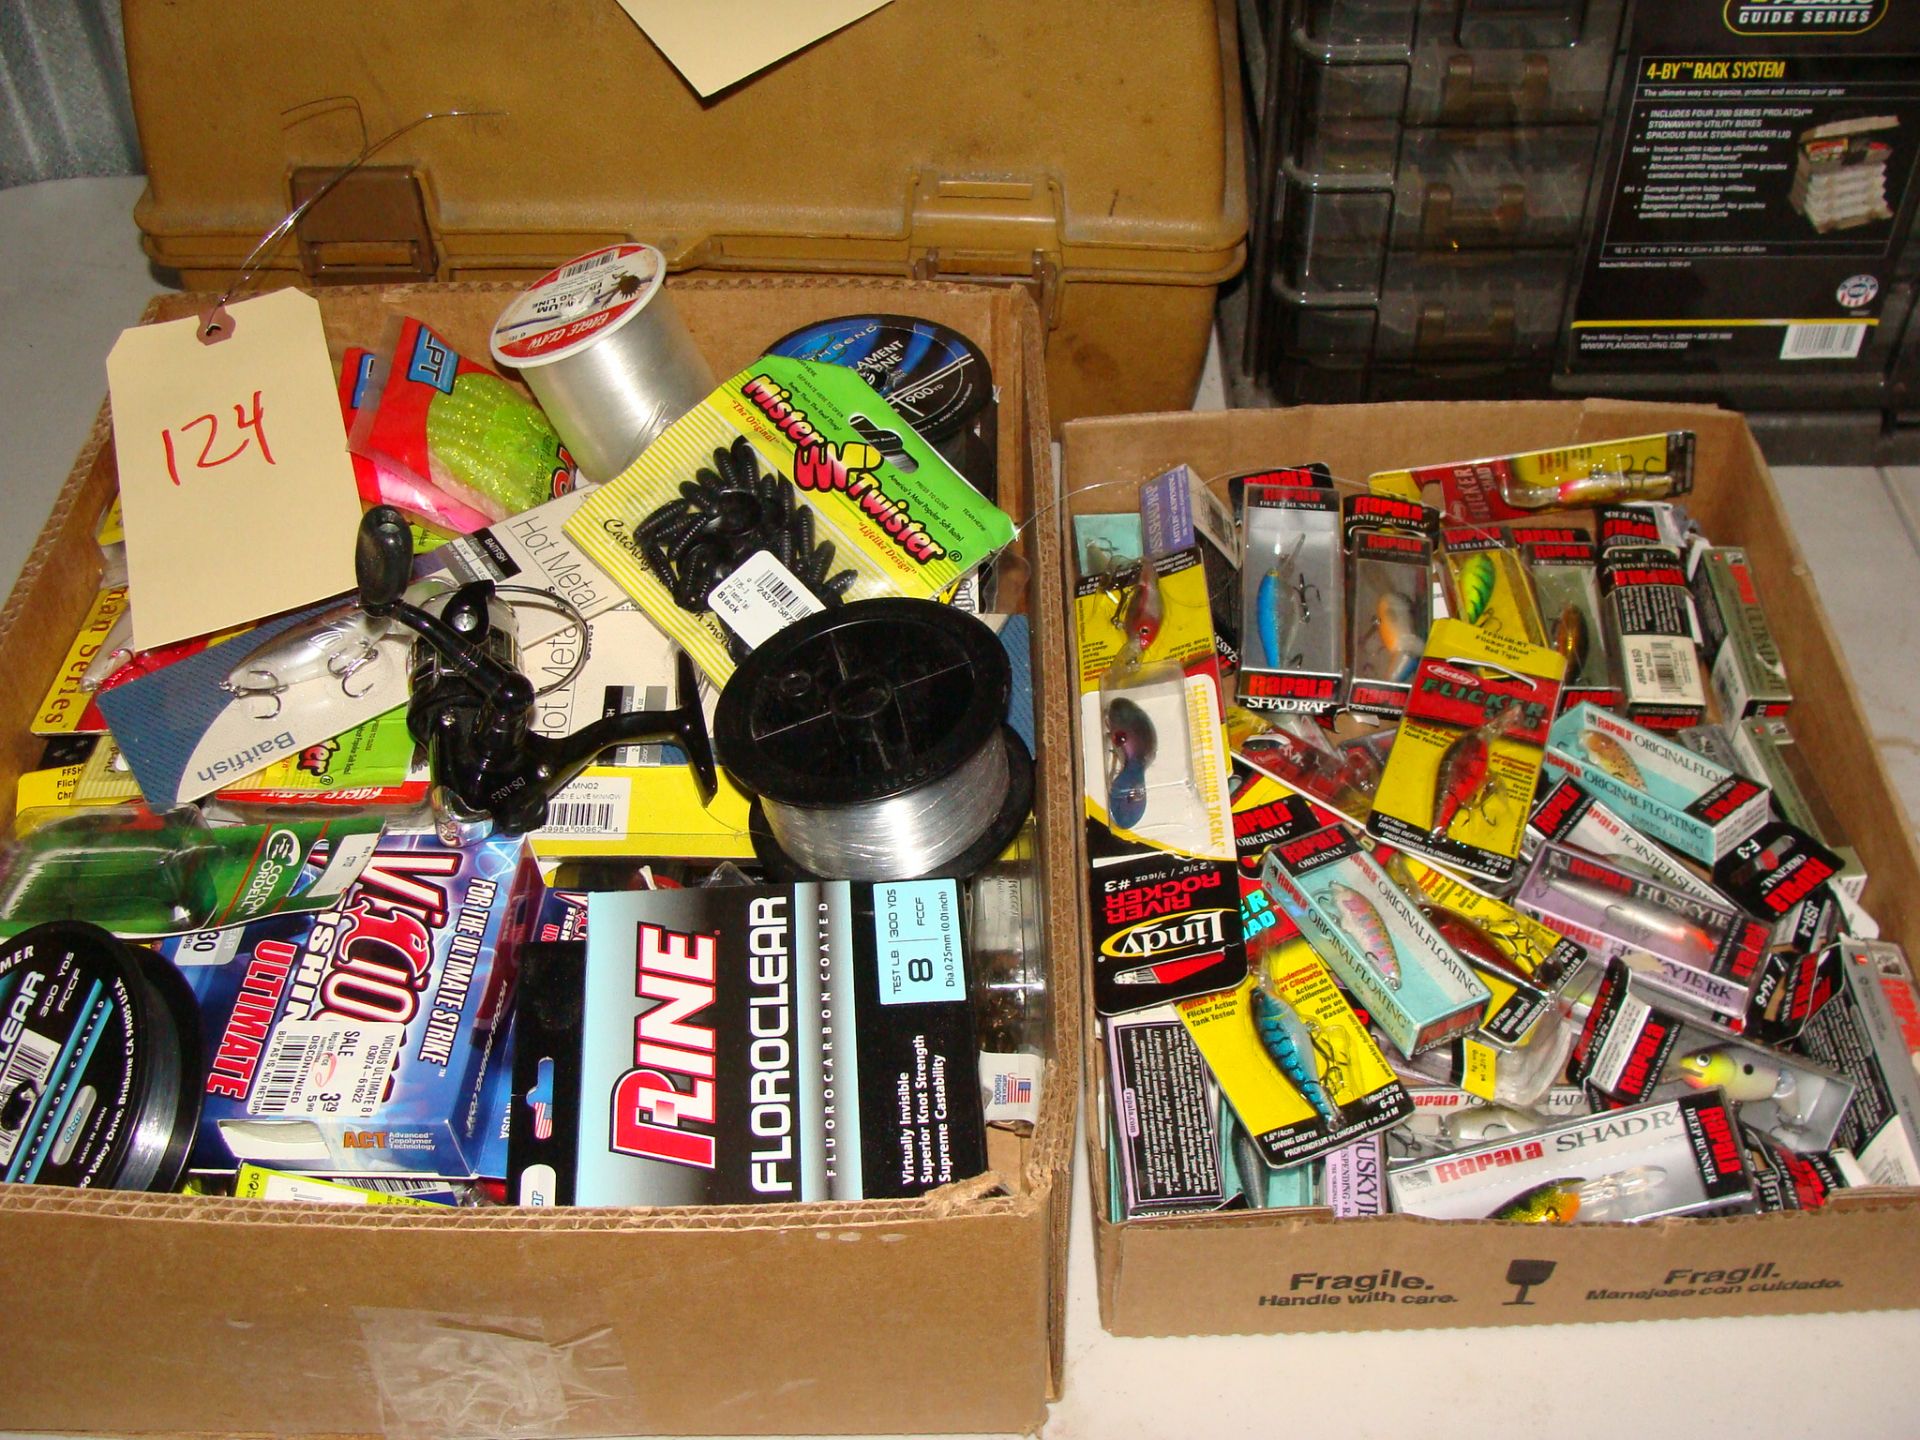 2 boxes of Lures and Fishing Supplies